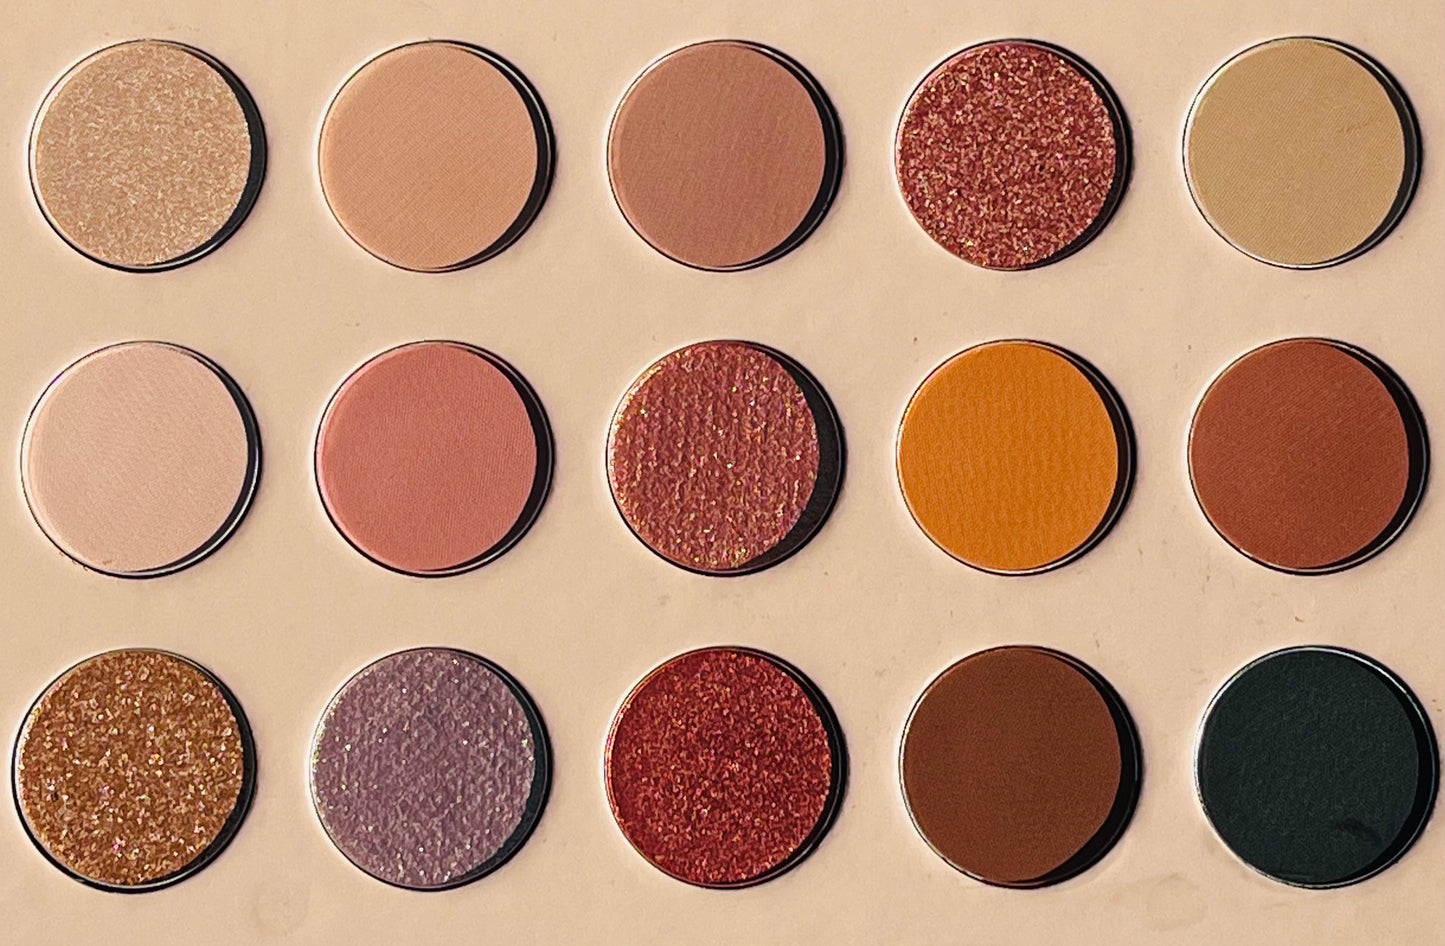 THE PRETTY NATURAL GIRL EYESHADOW PALETTE